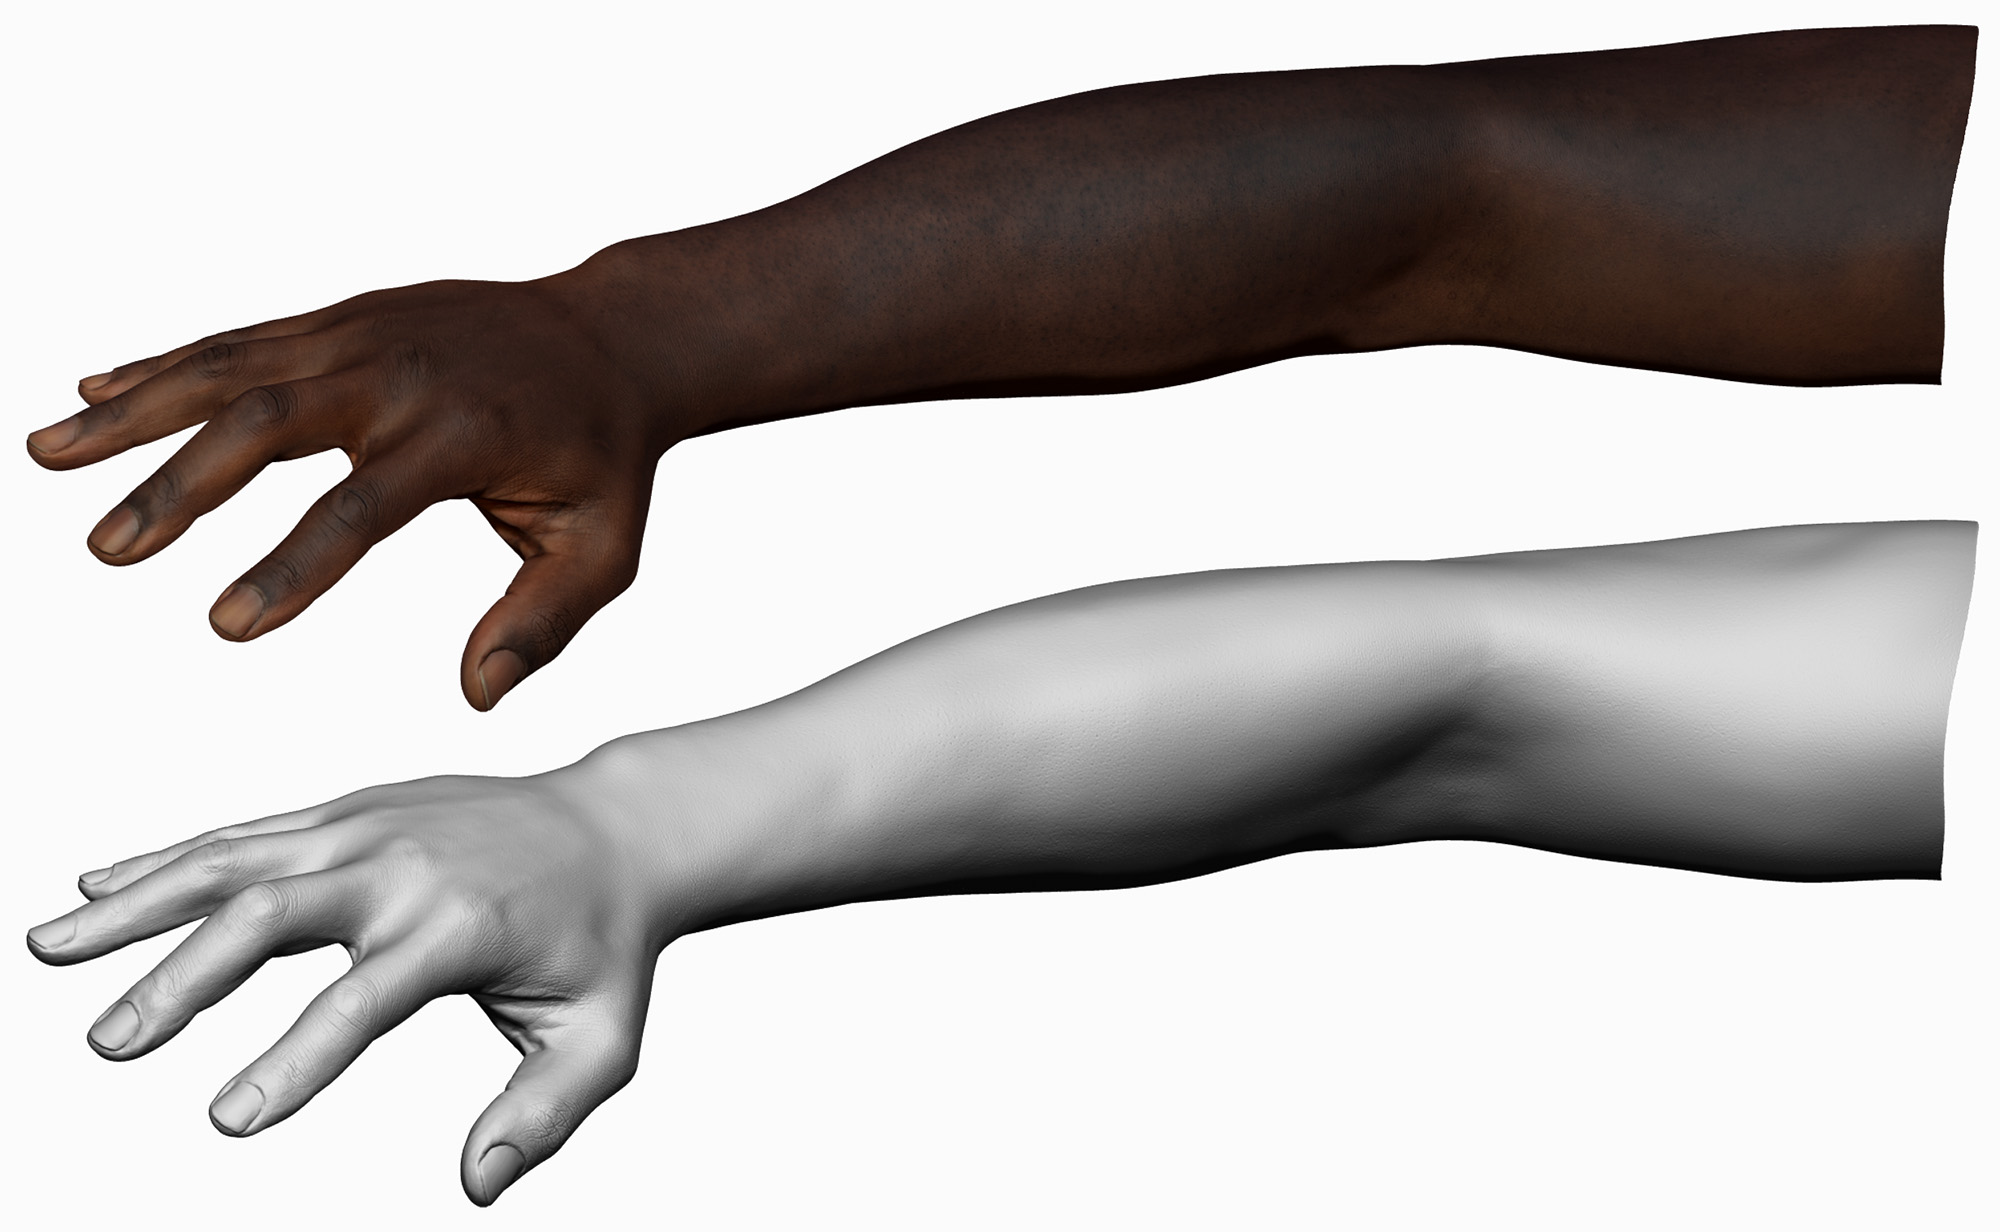 Forty Year old black male scanned from bicep to fingertip model in 3d